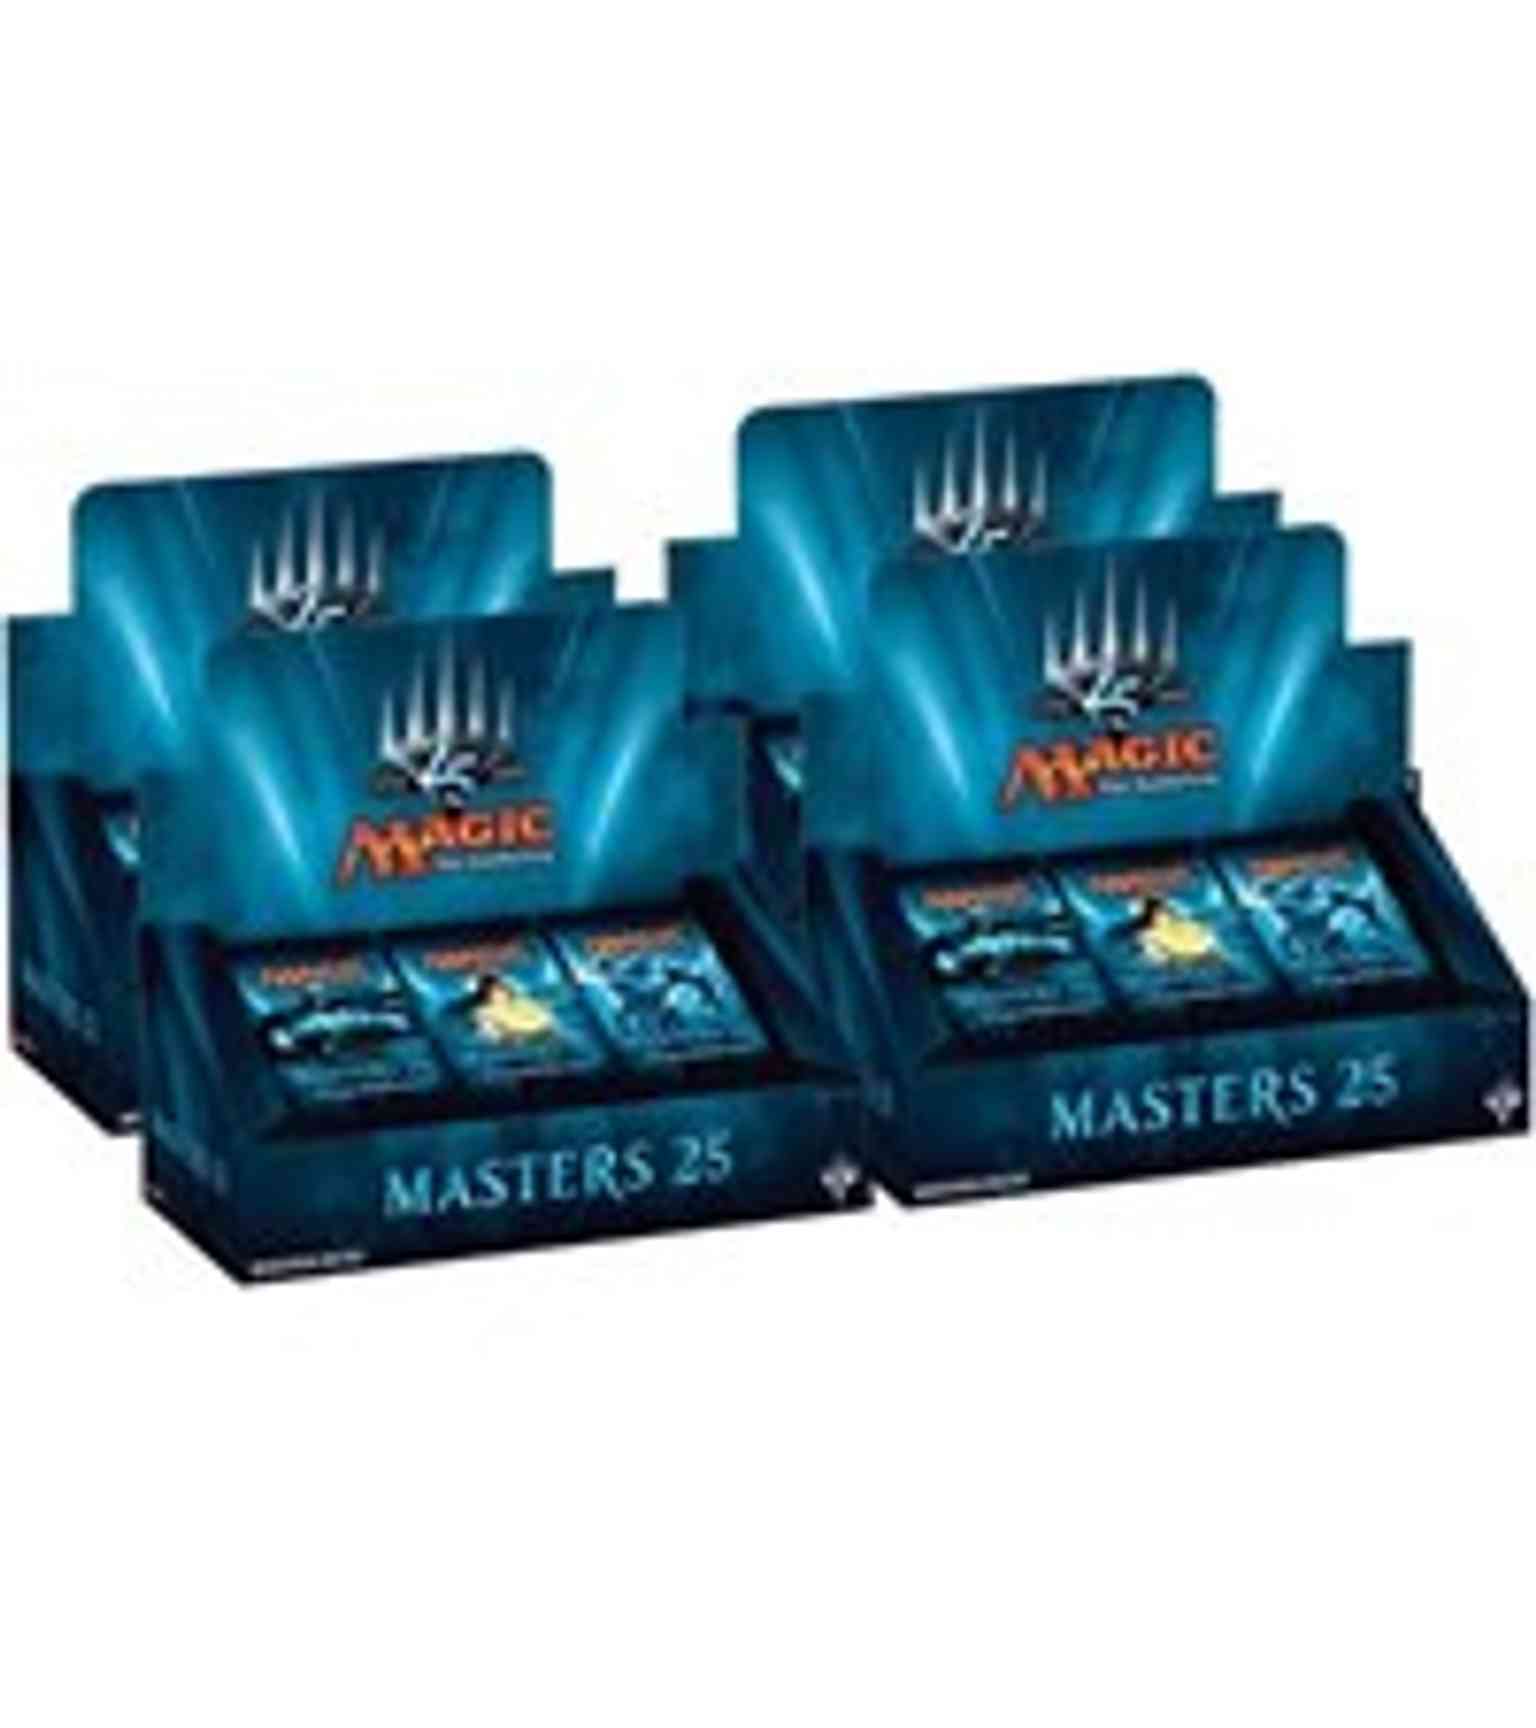 Masters 25 - Booster Box Case magic card front